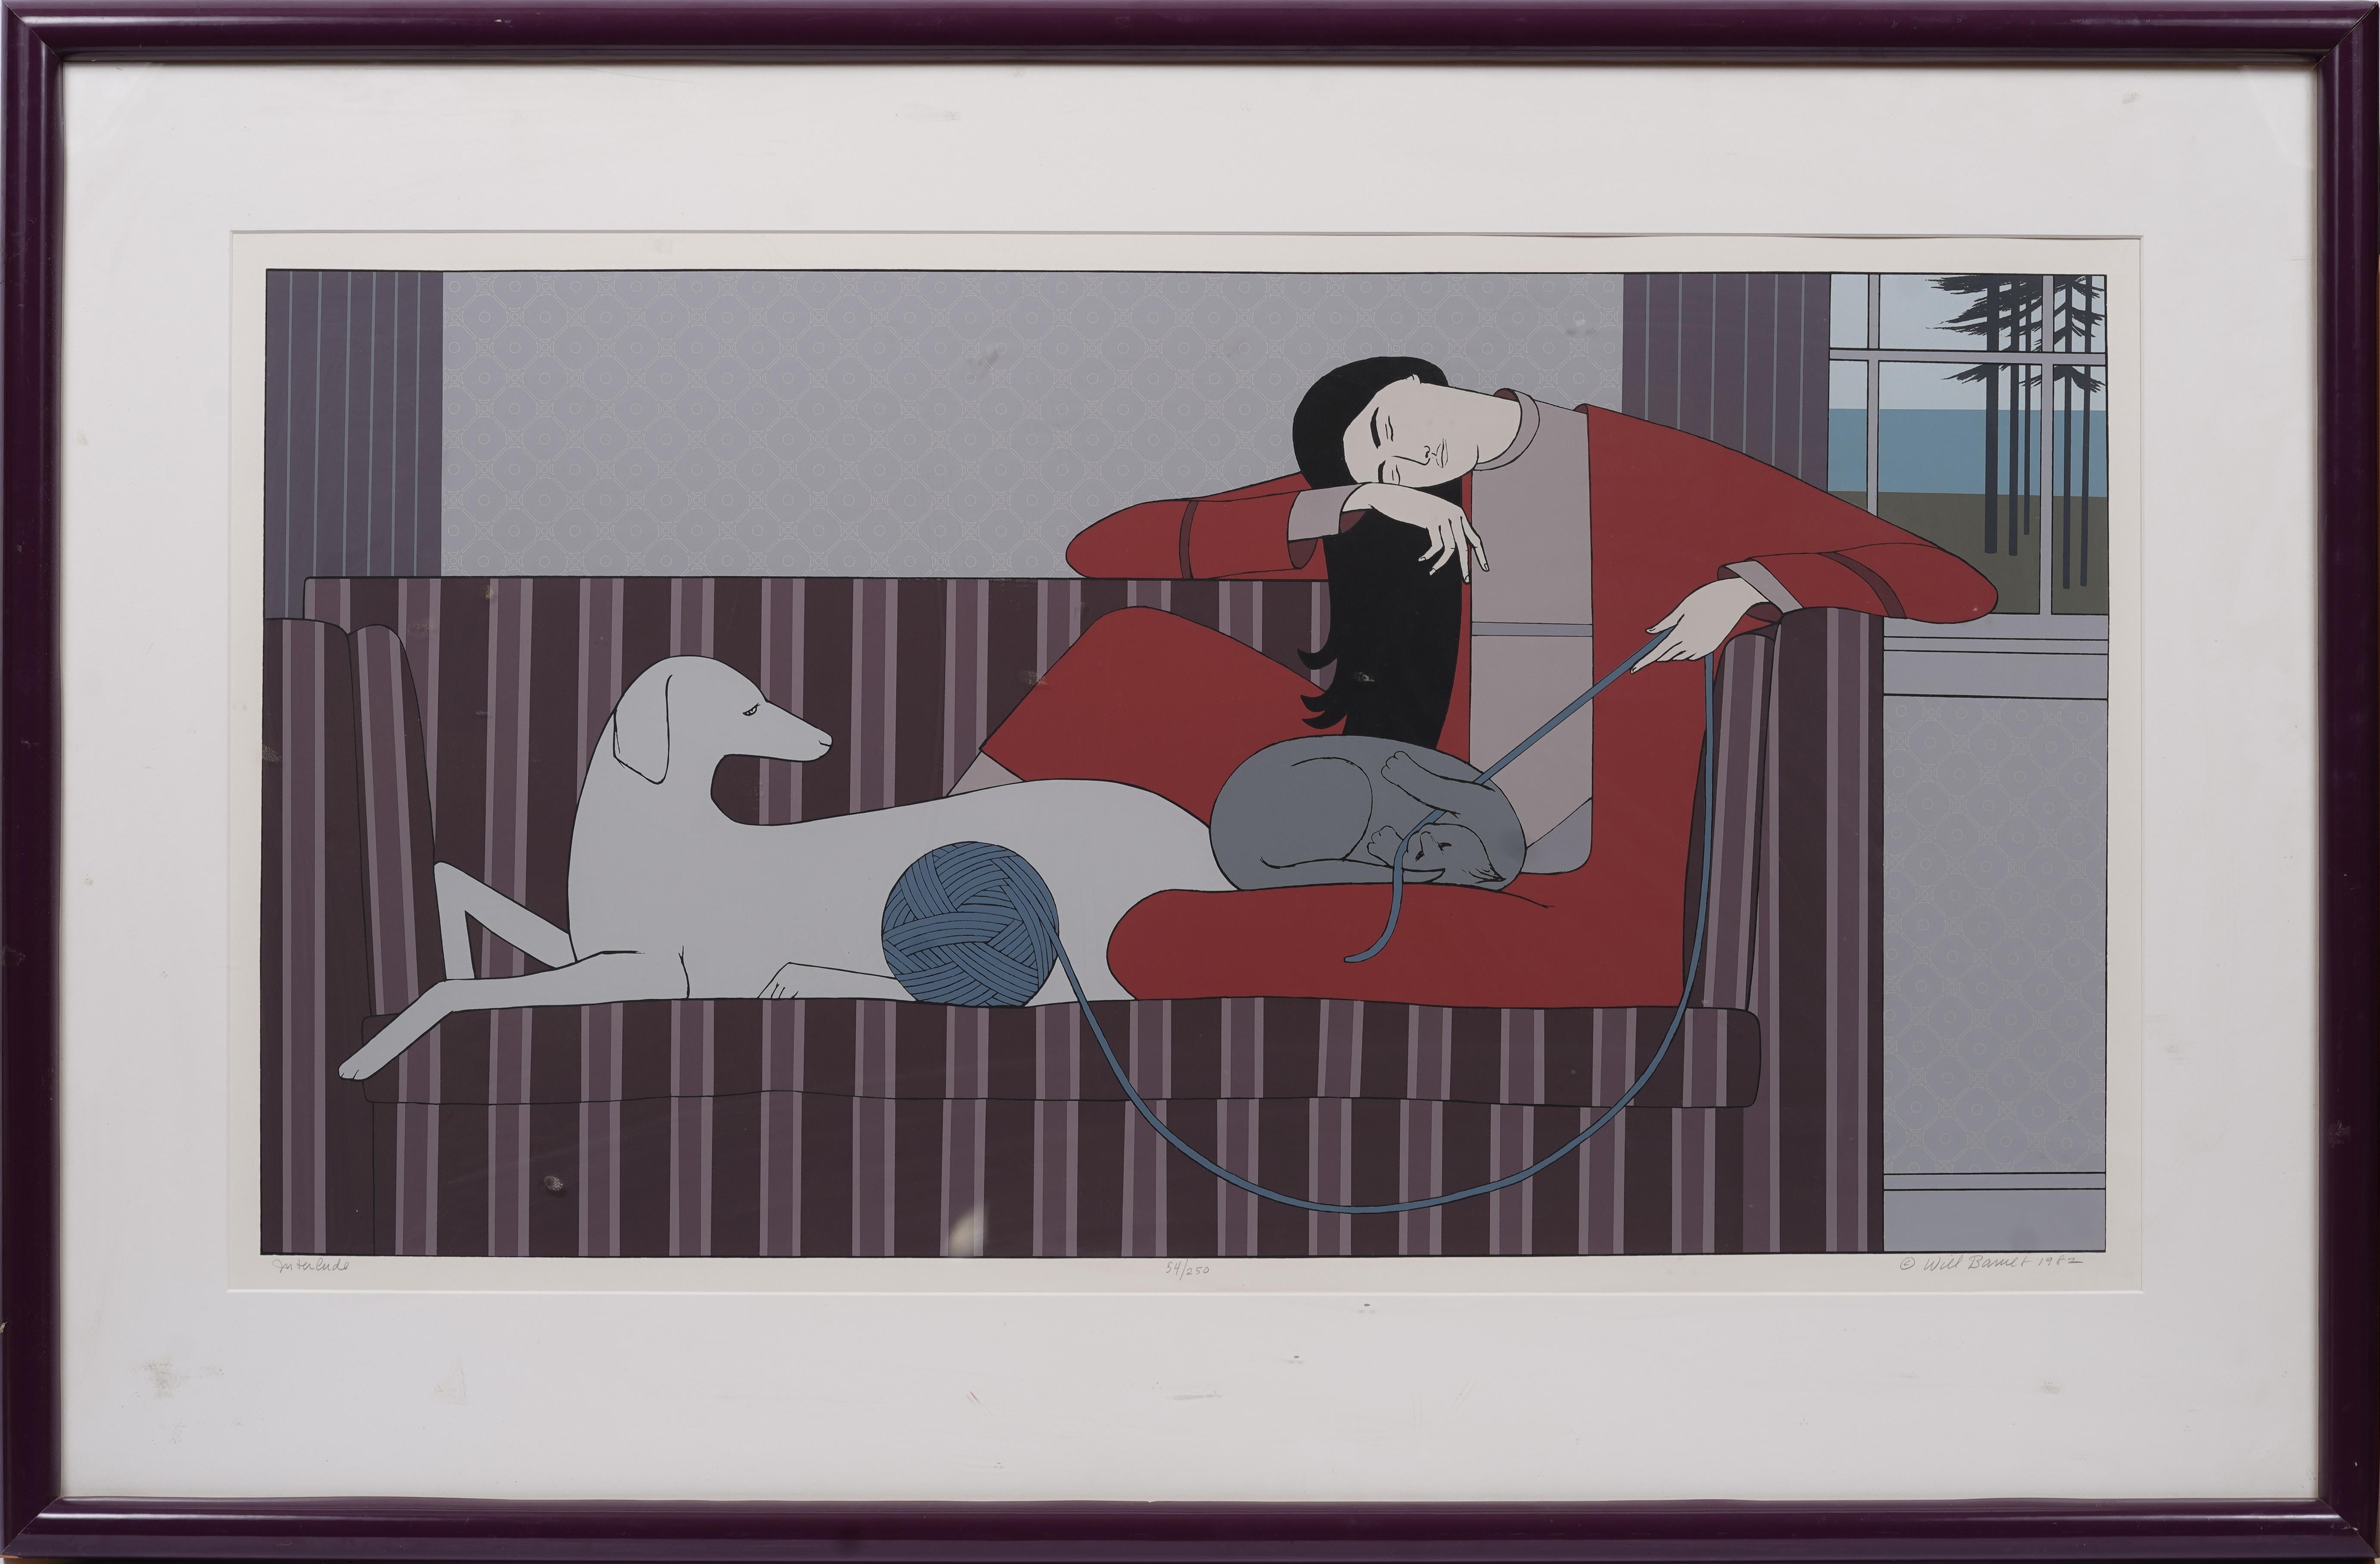 Antique American Modernist Portrait Signed Limited Edition Serigraph Interlude - Print by Will Barnet